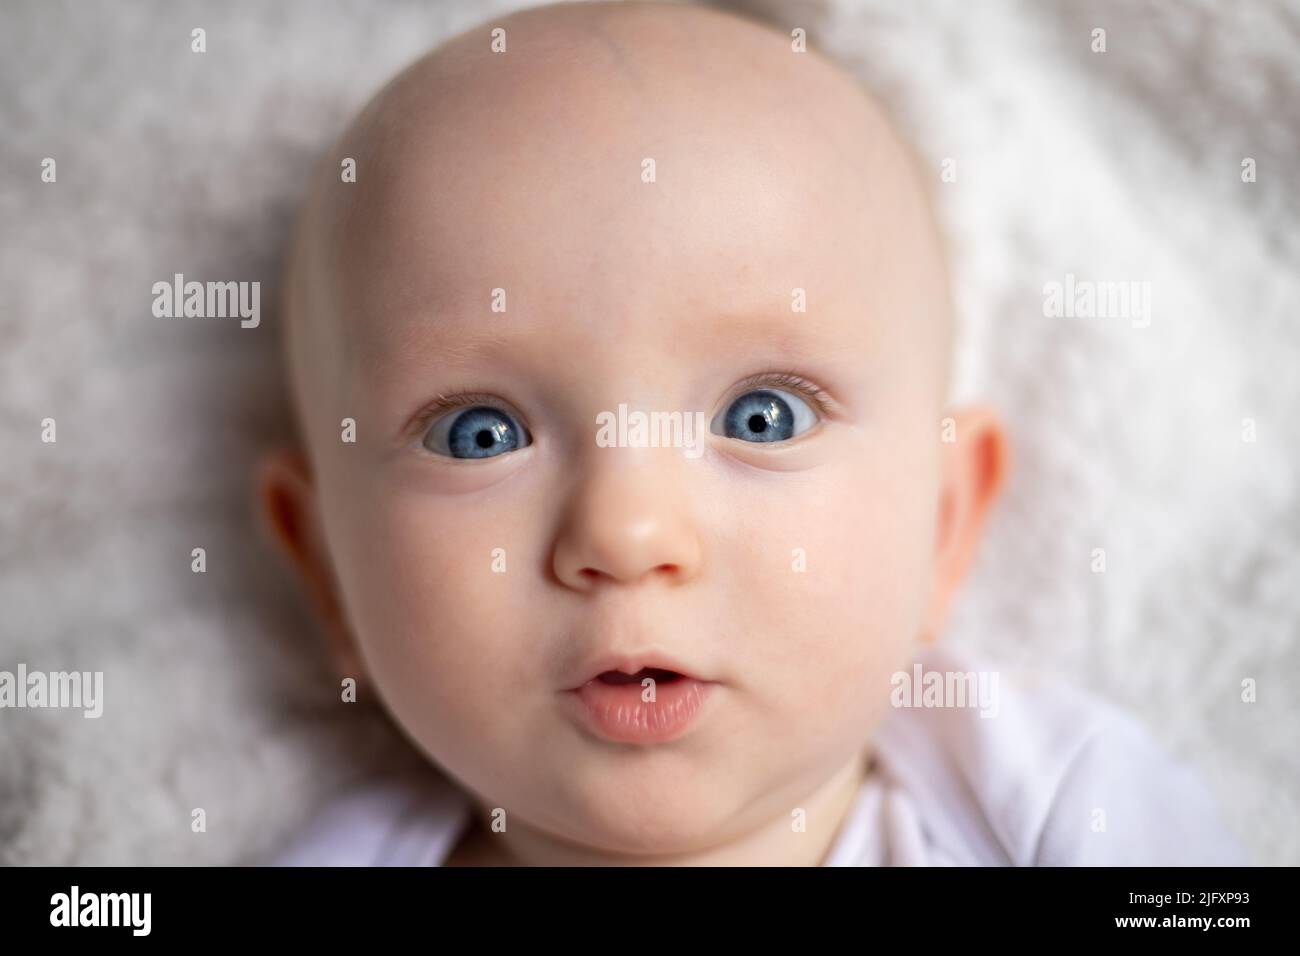 Children's portrait. Close-up of a face with bright blue eyes. Babies ...